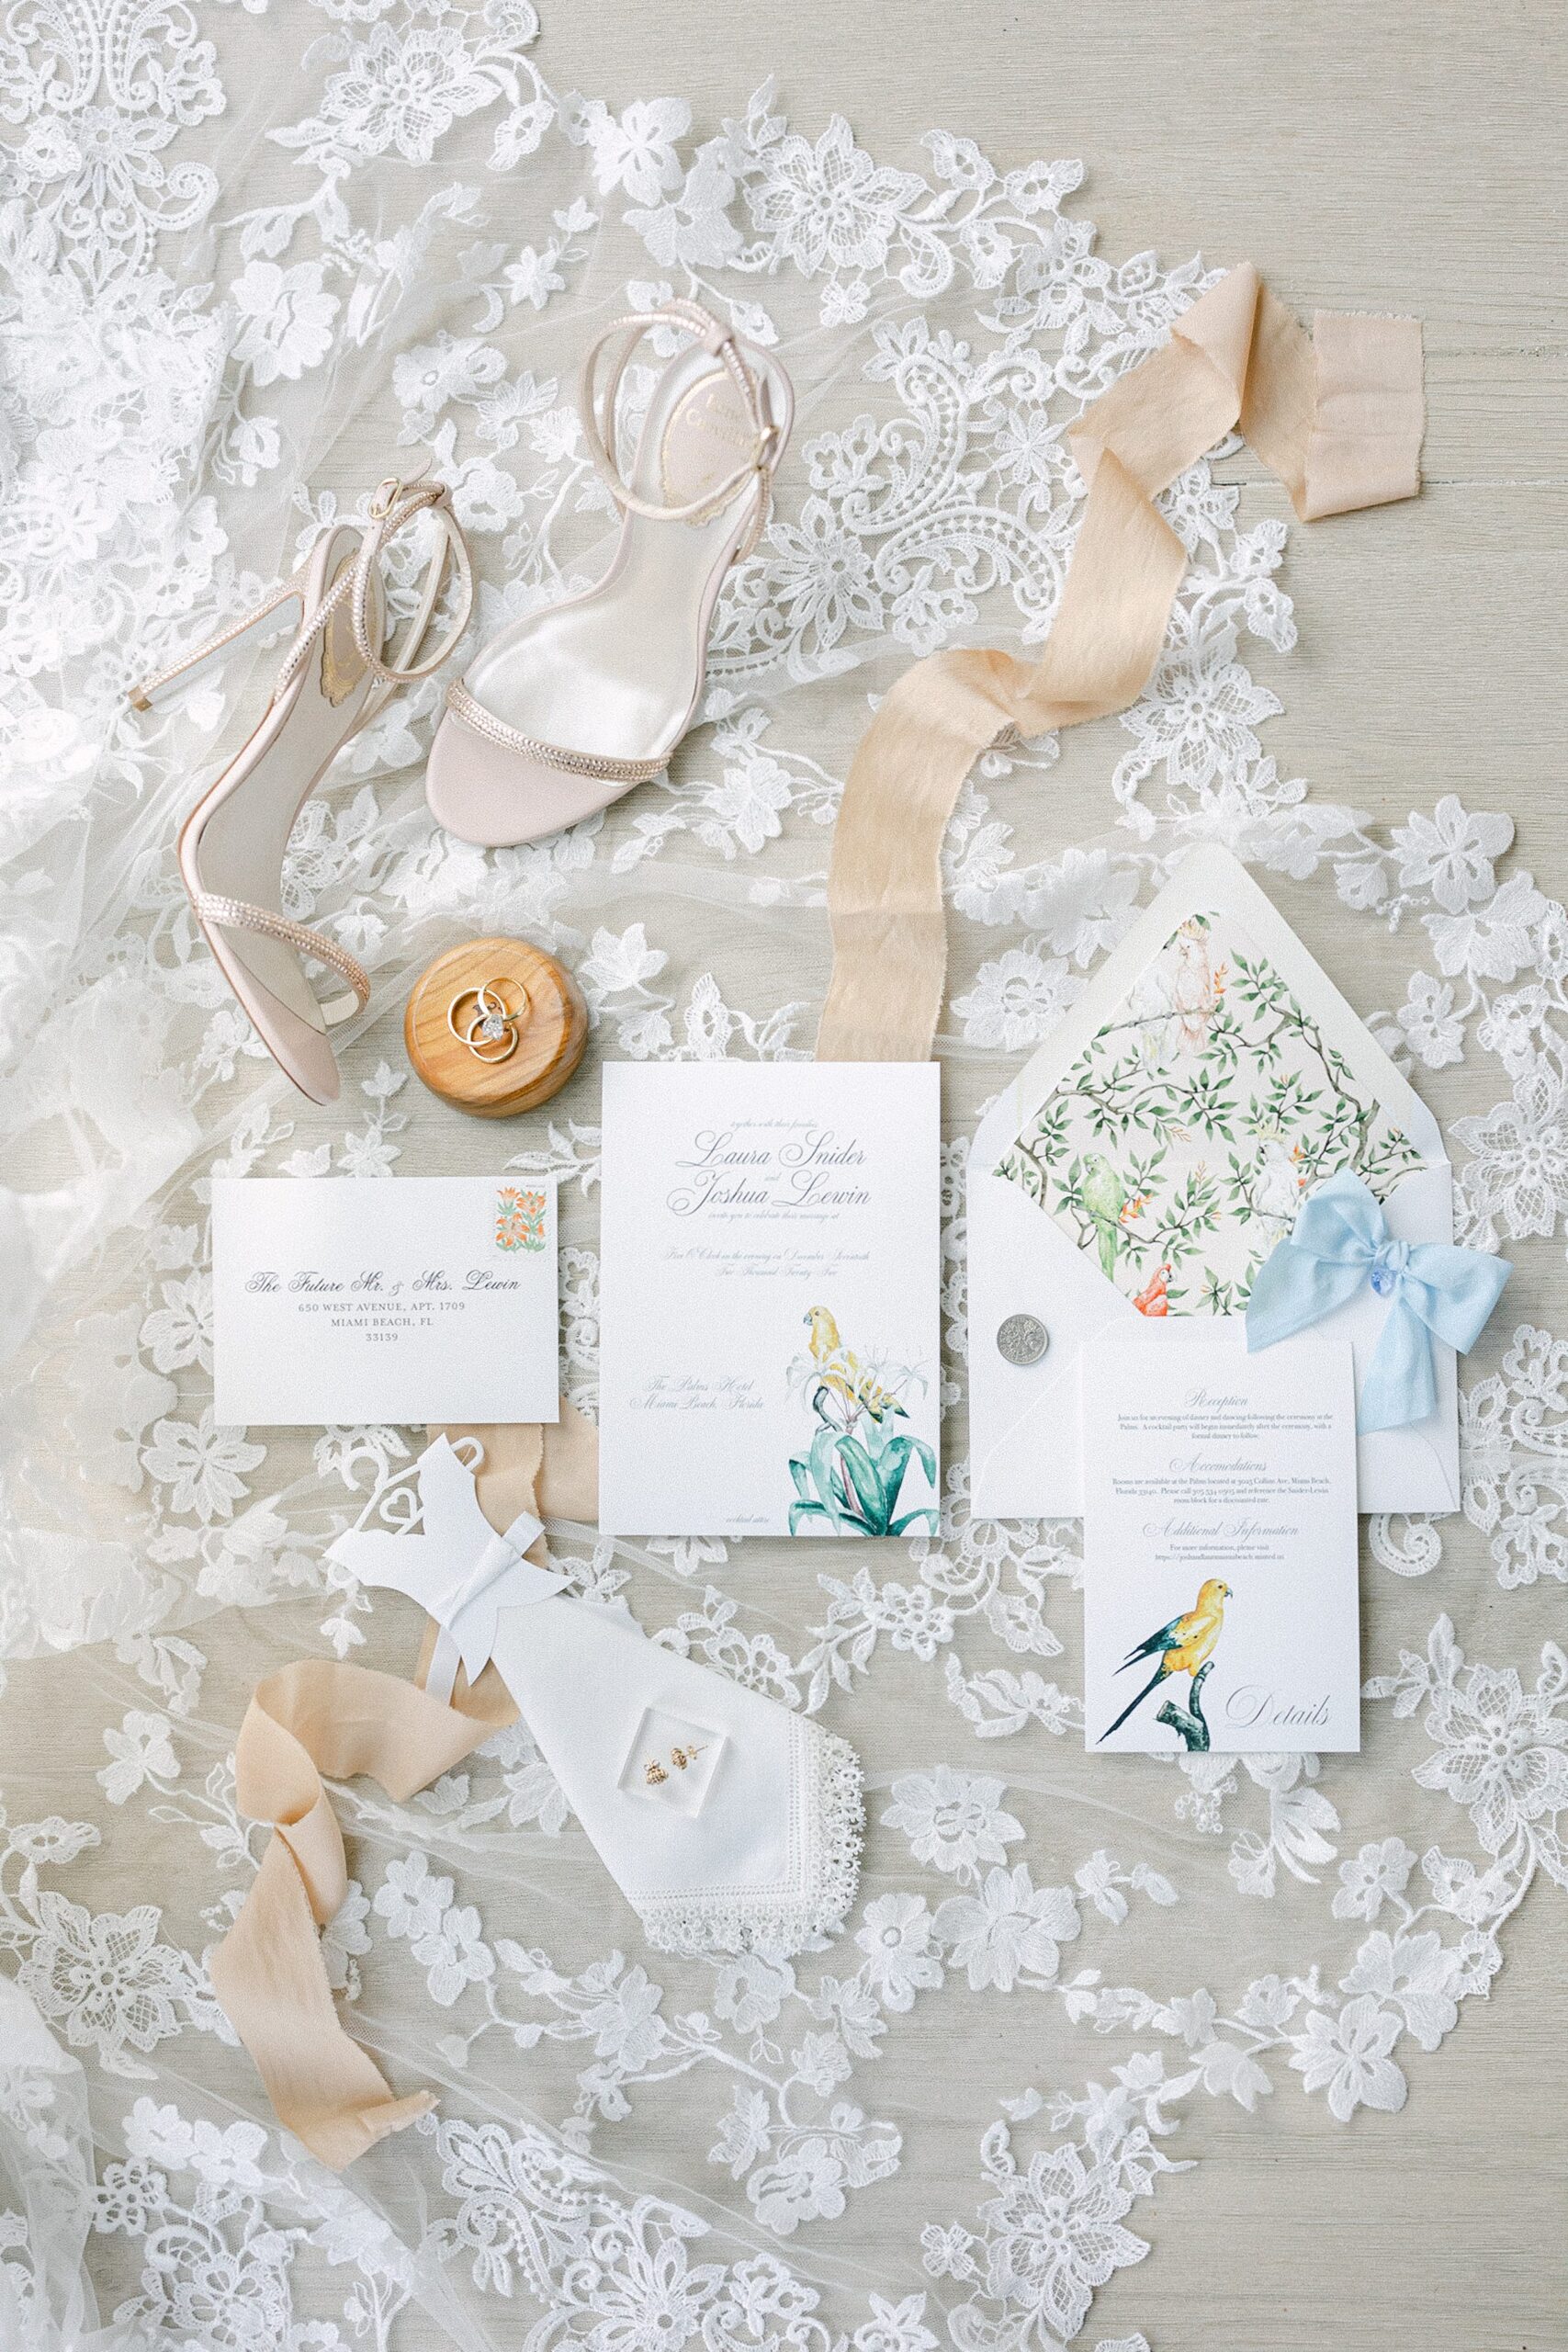 a lay flat composition of wedding stationary, rings, shoes on top of her lace veil